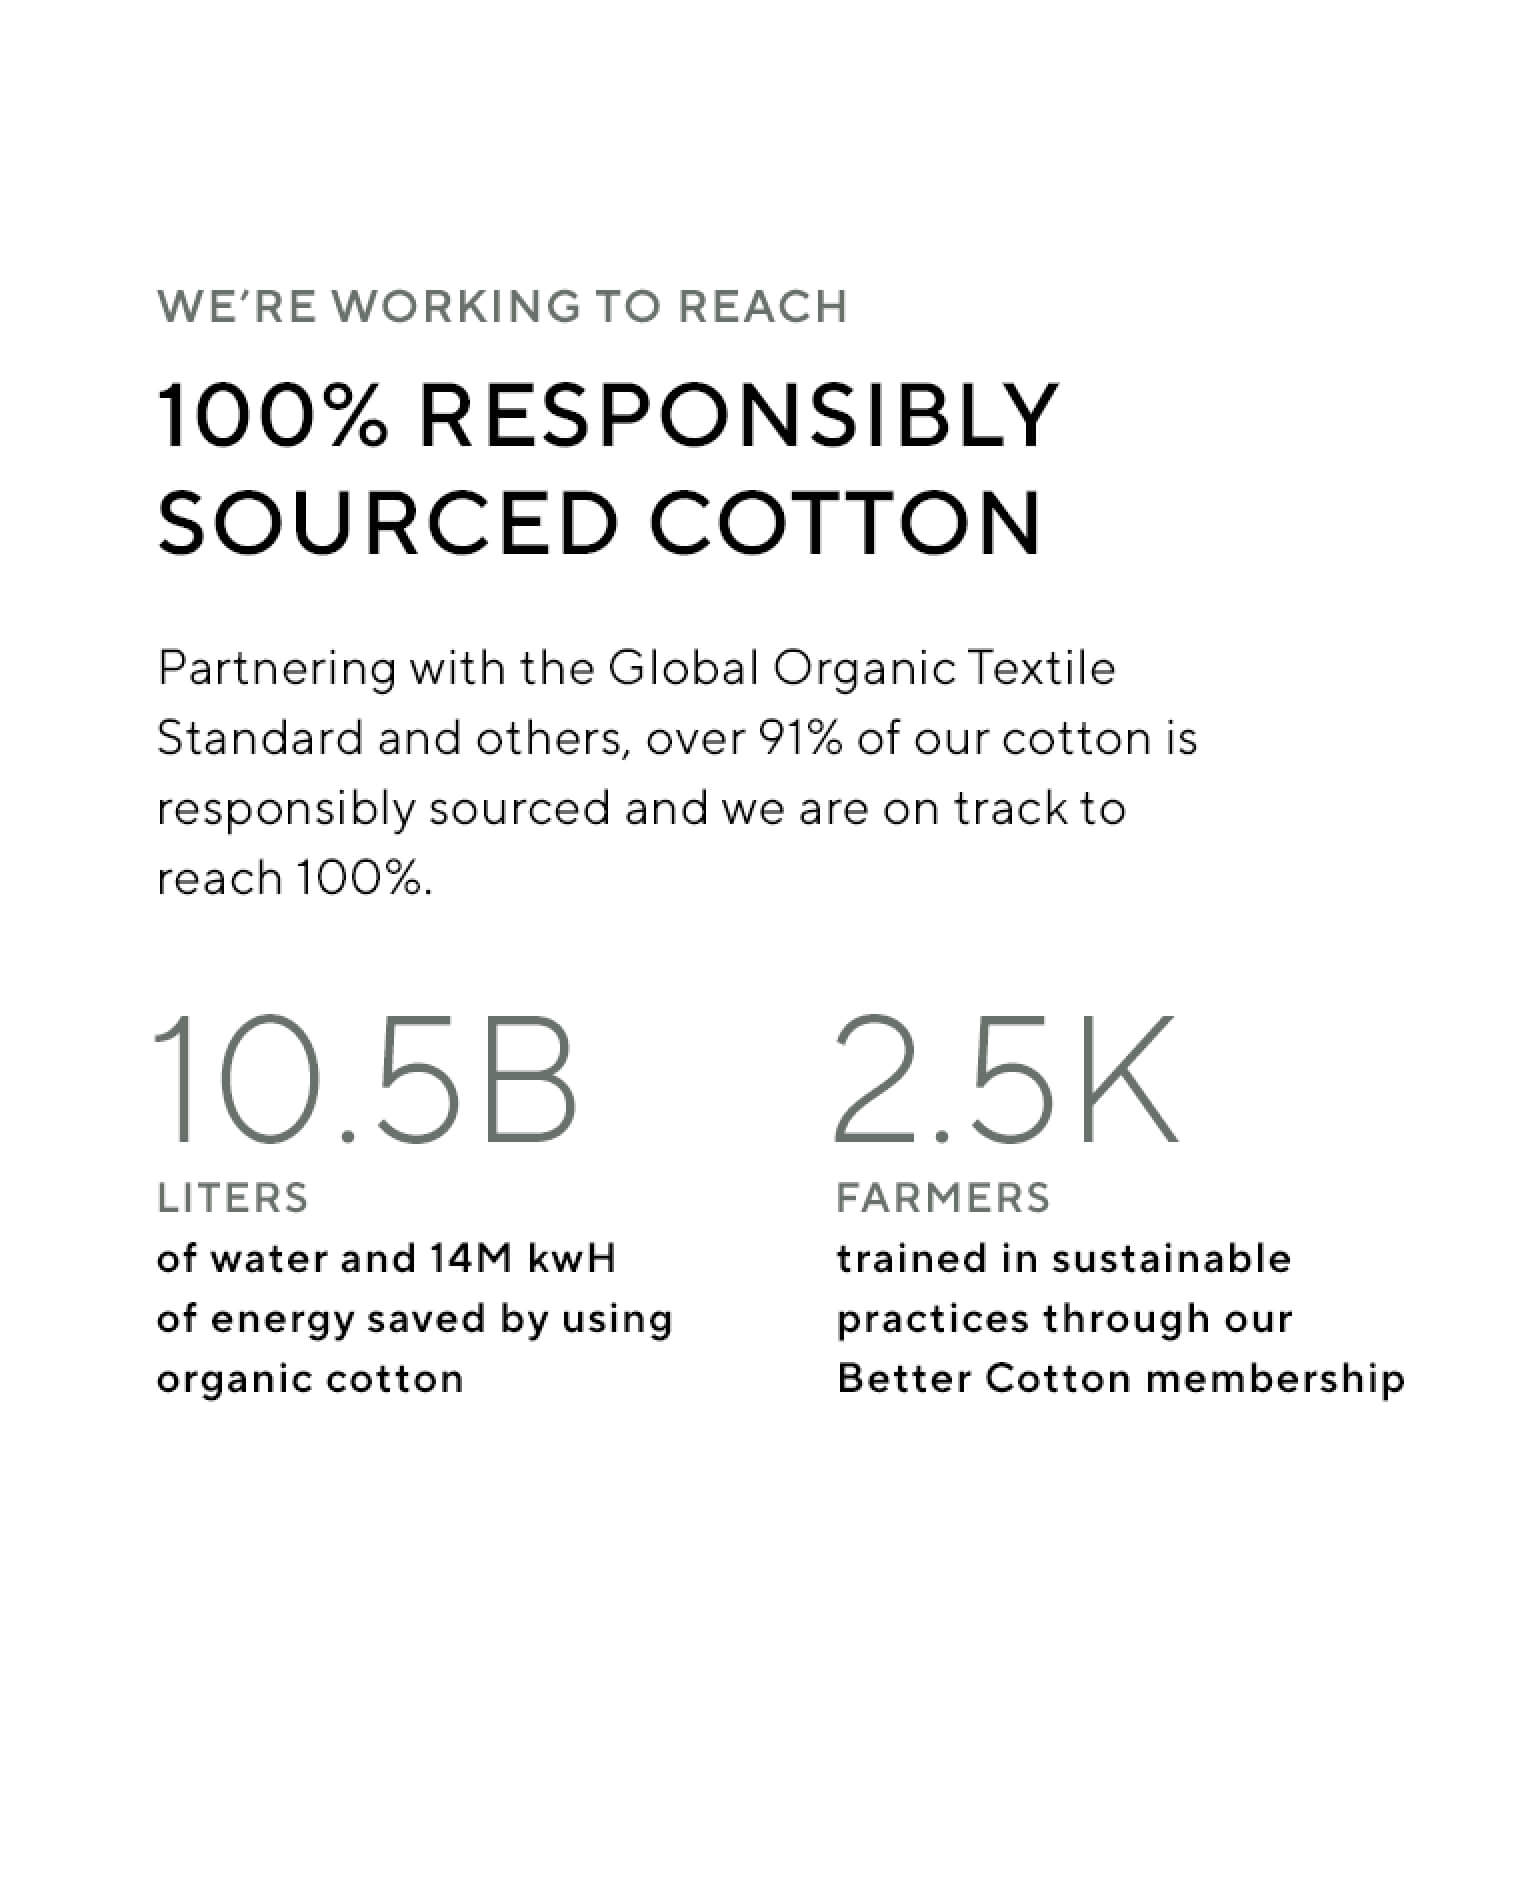 We're Working to Reach 100% Responsibly Sourced Cotton